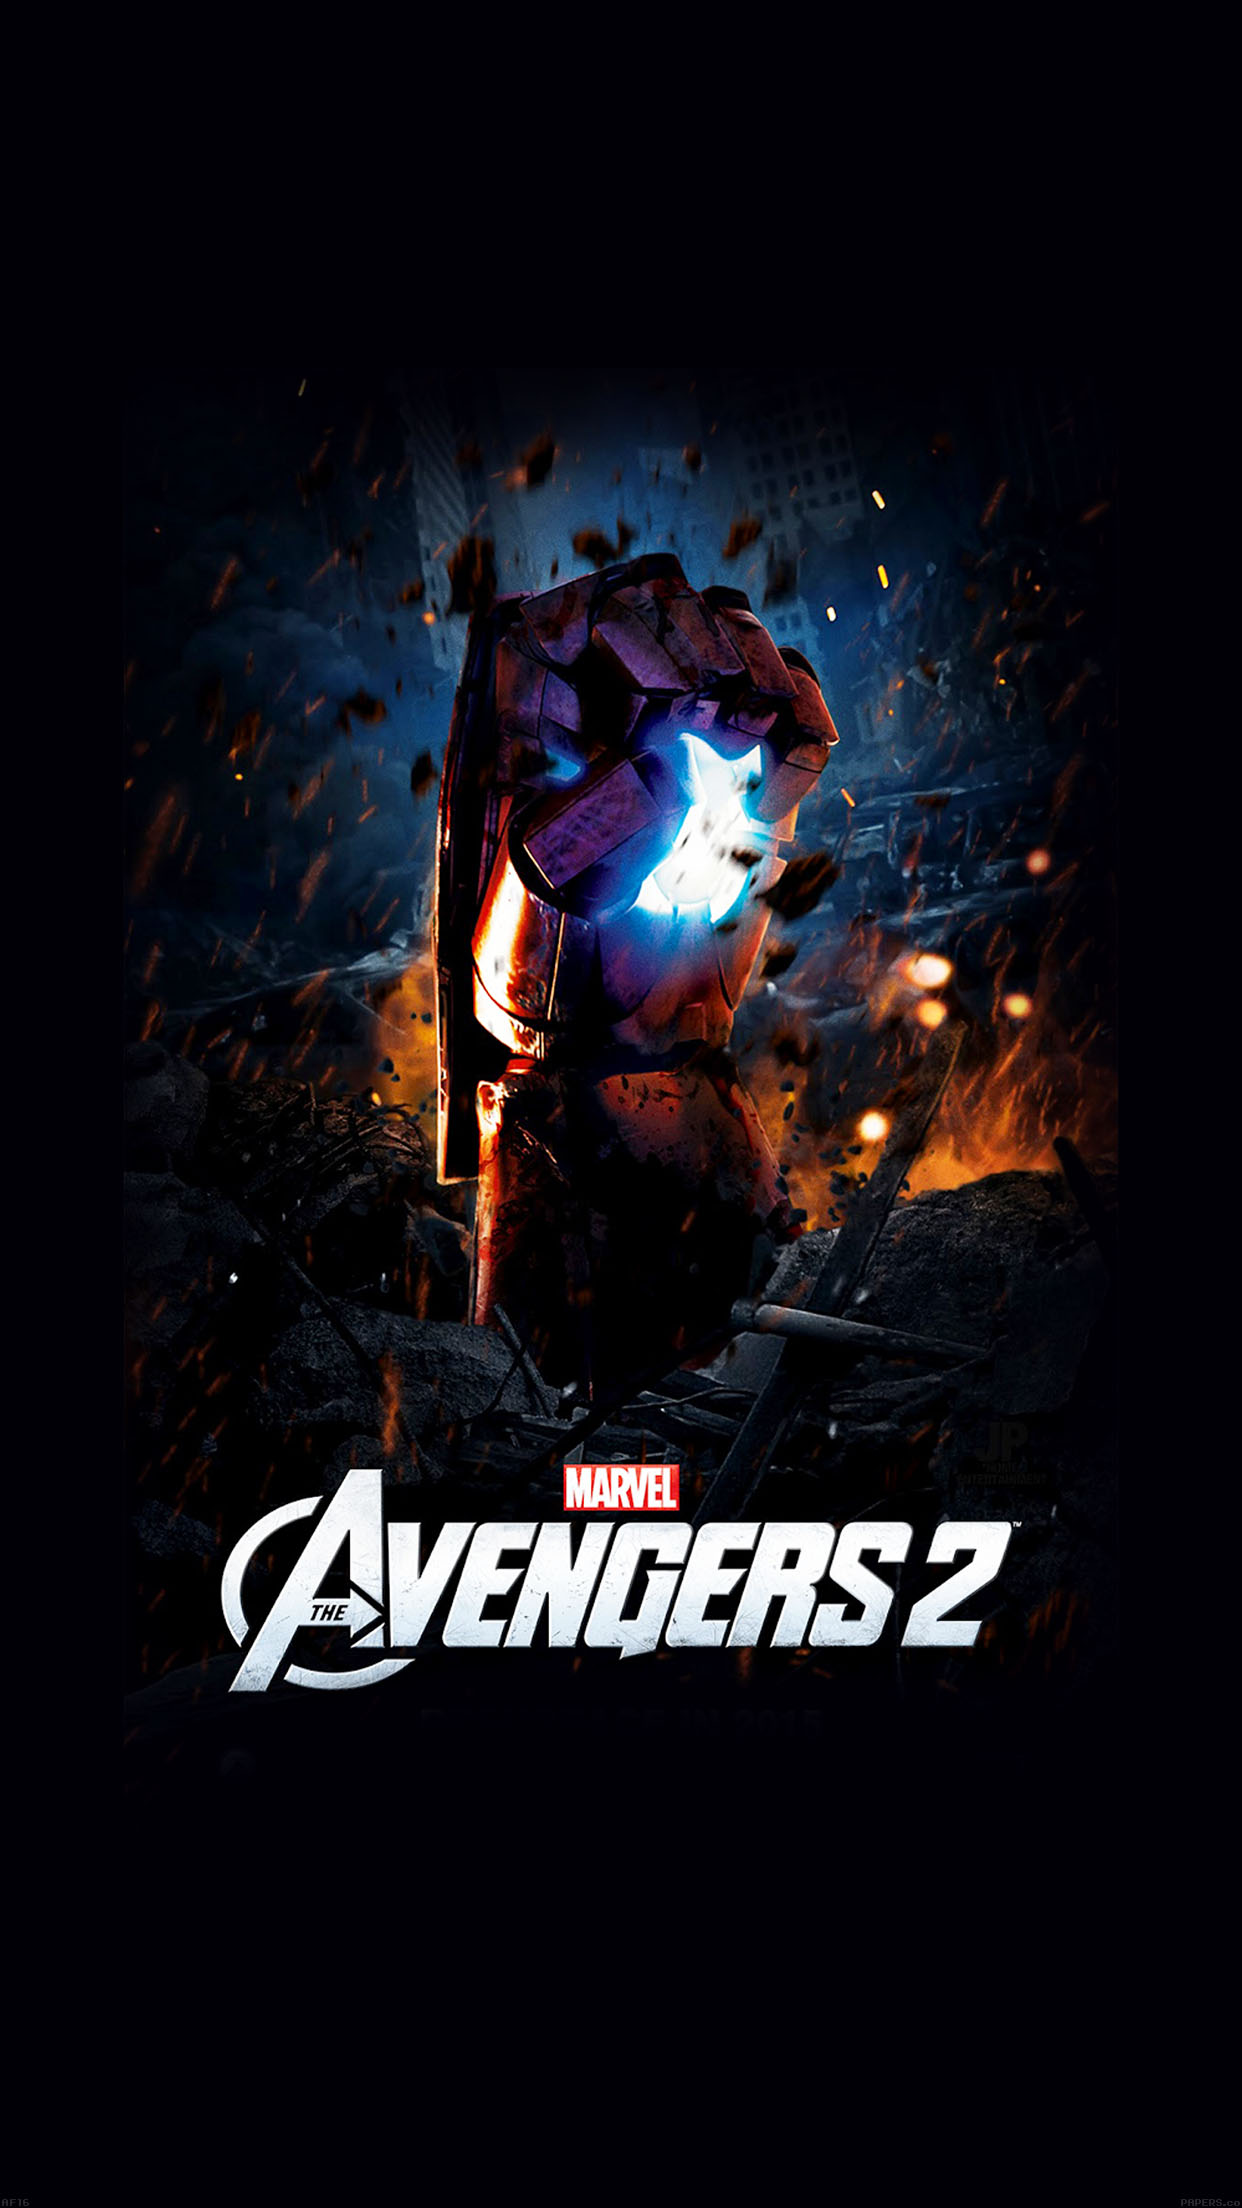 Avengers 2 Poster Hollywood Film Poster Android wallpaper ...